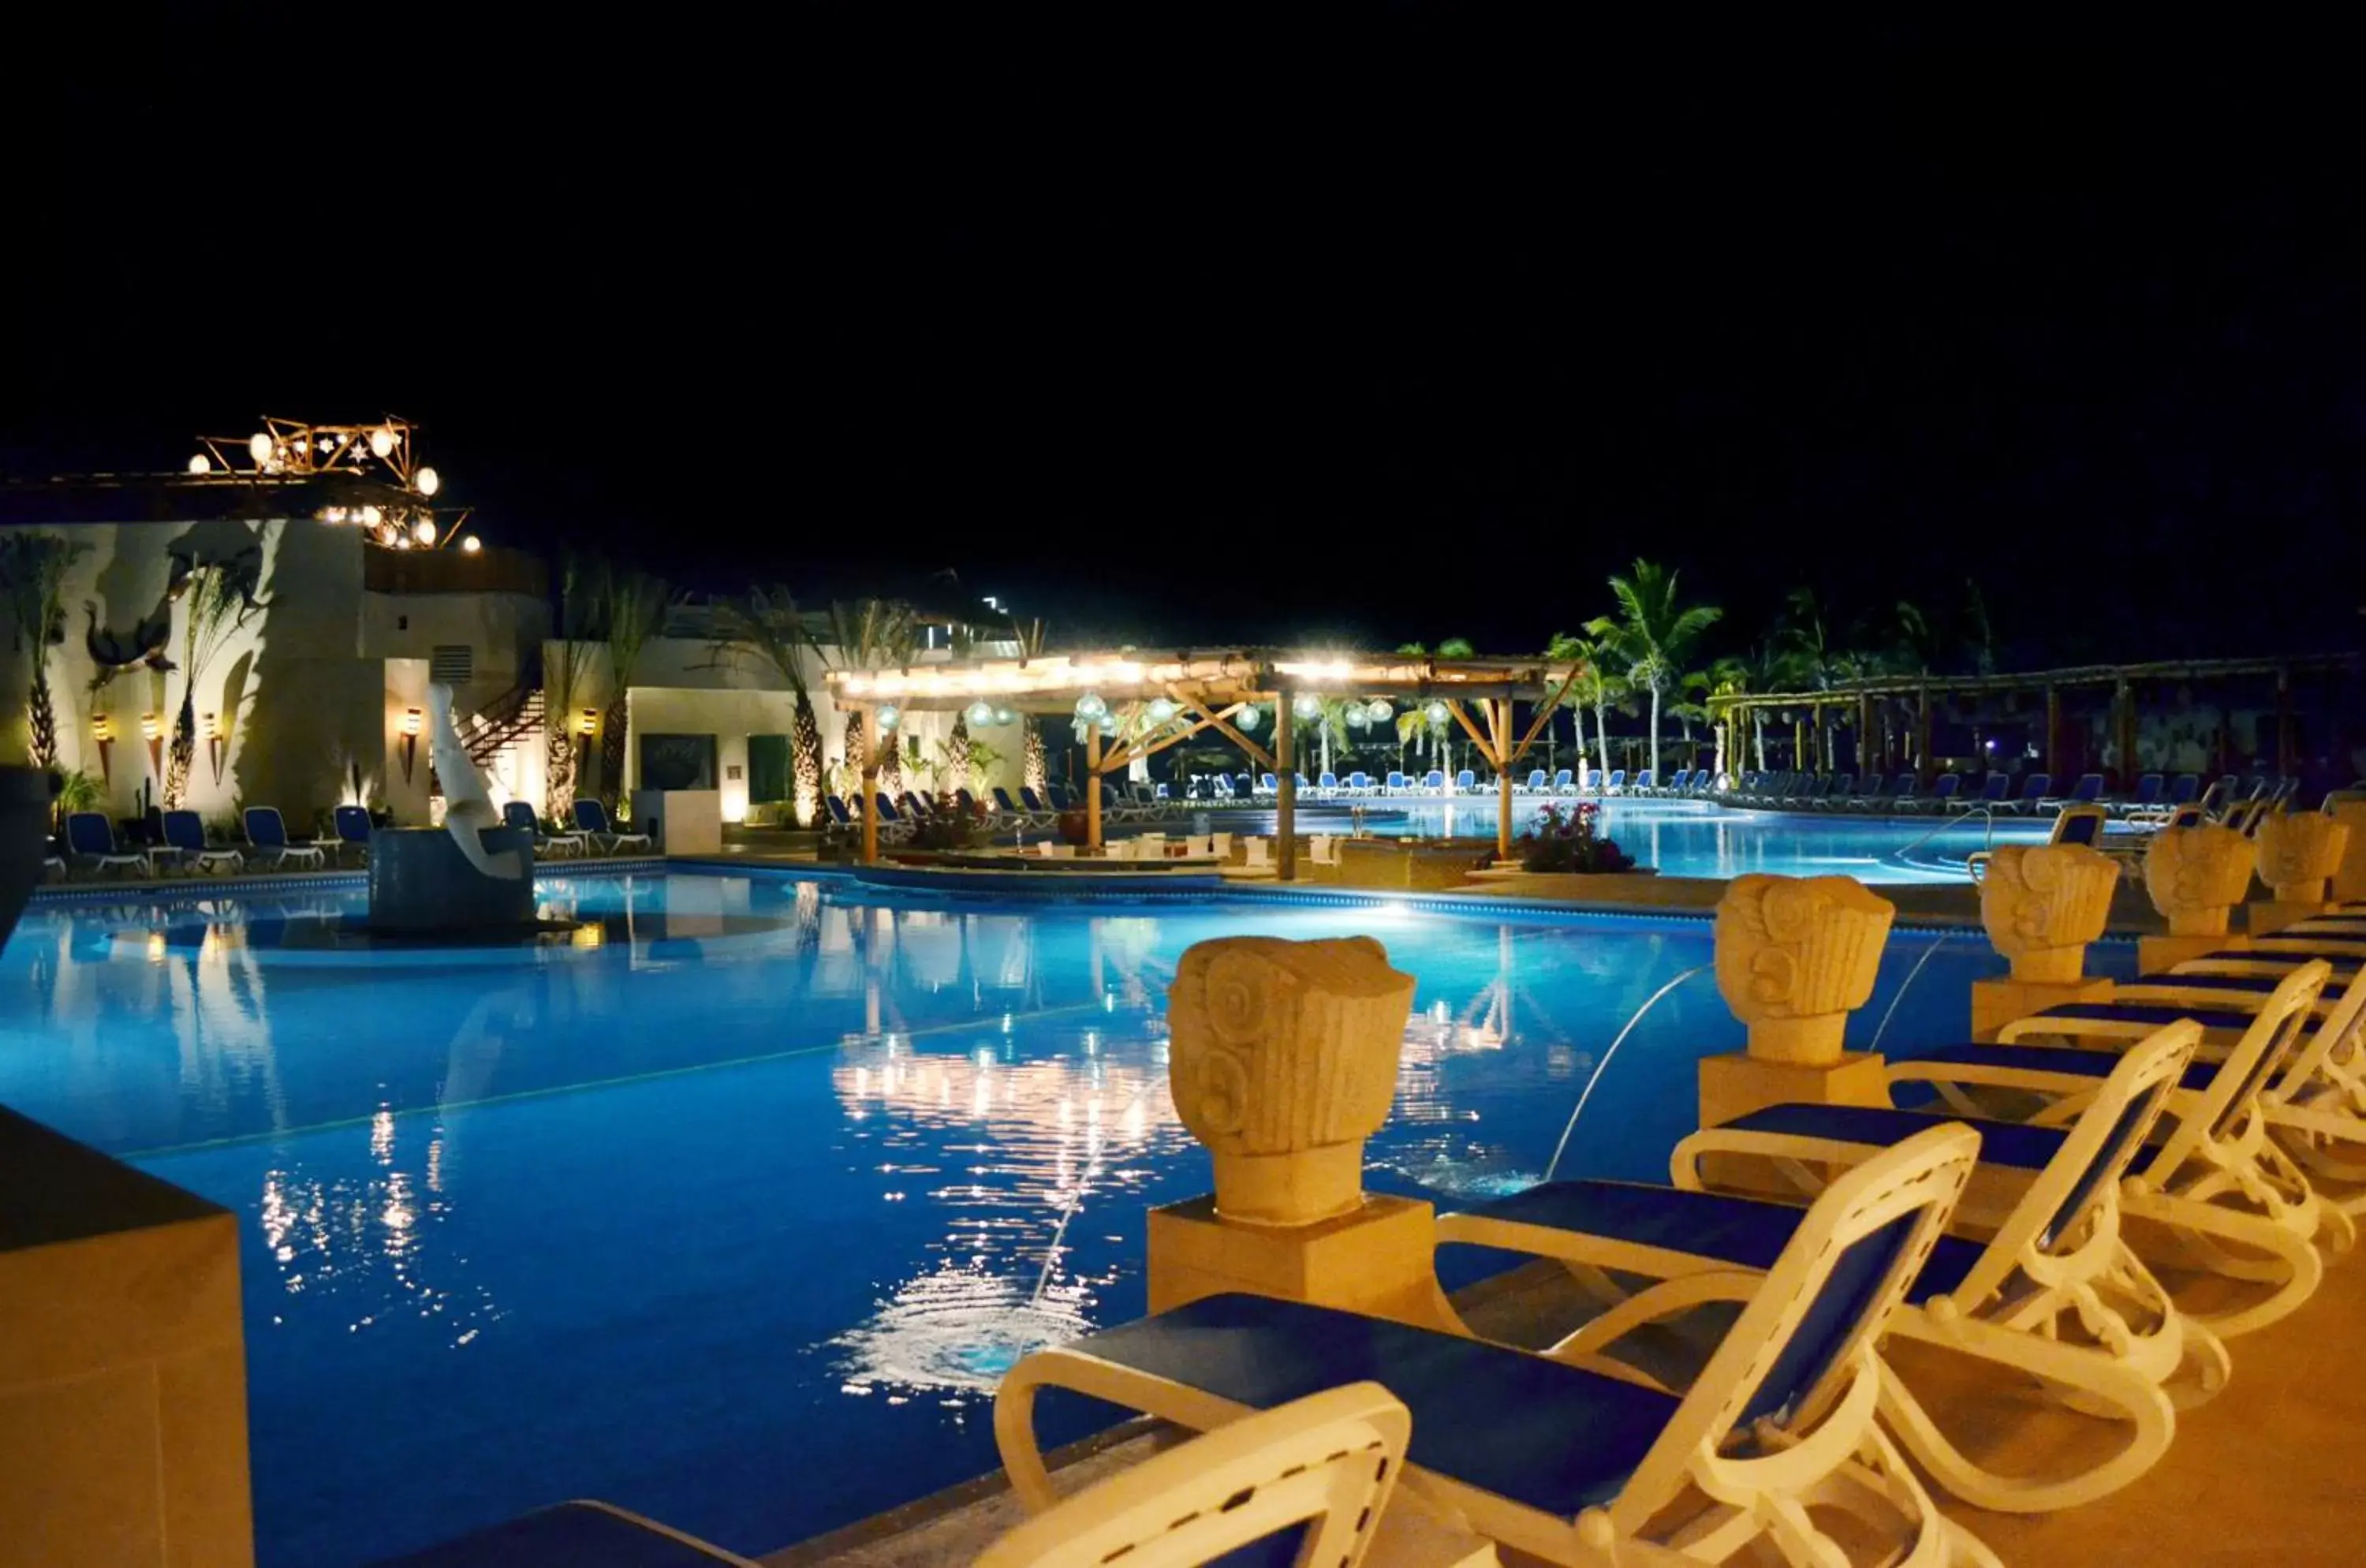 Swimming Pool in Royal Decameron Los Cabos - All Inclusive